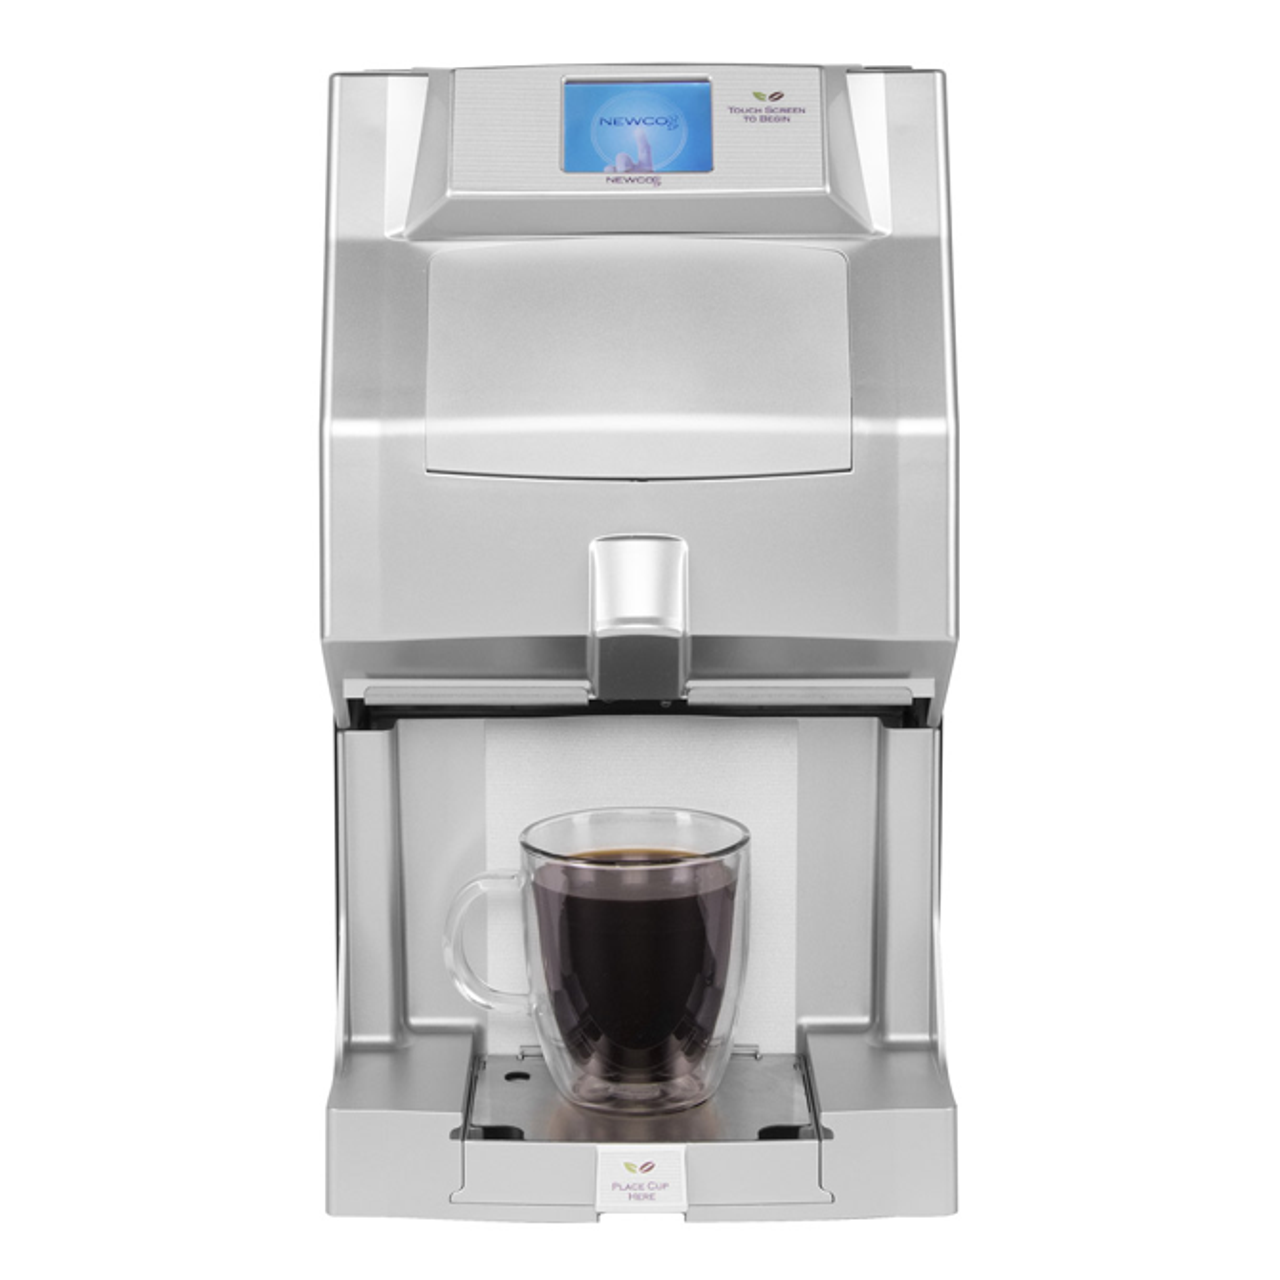 Newco Fresh Cup 4 Touch Pod Coffee Brewer